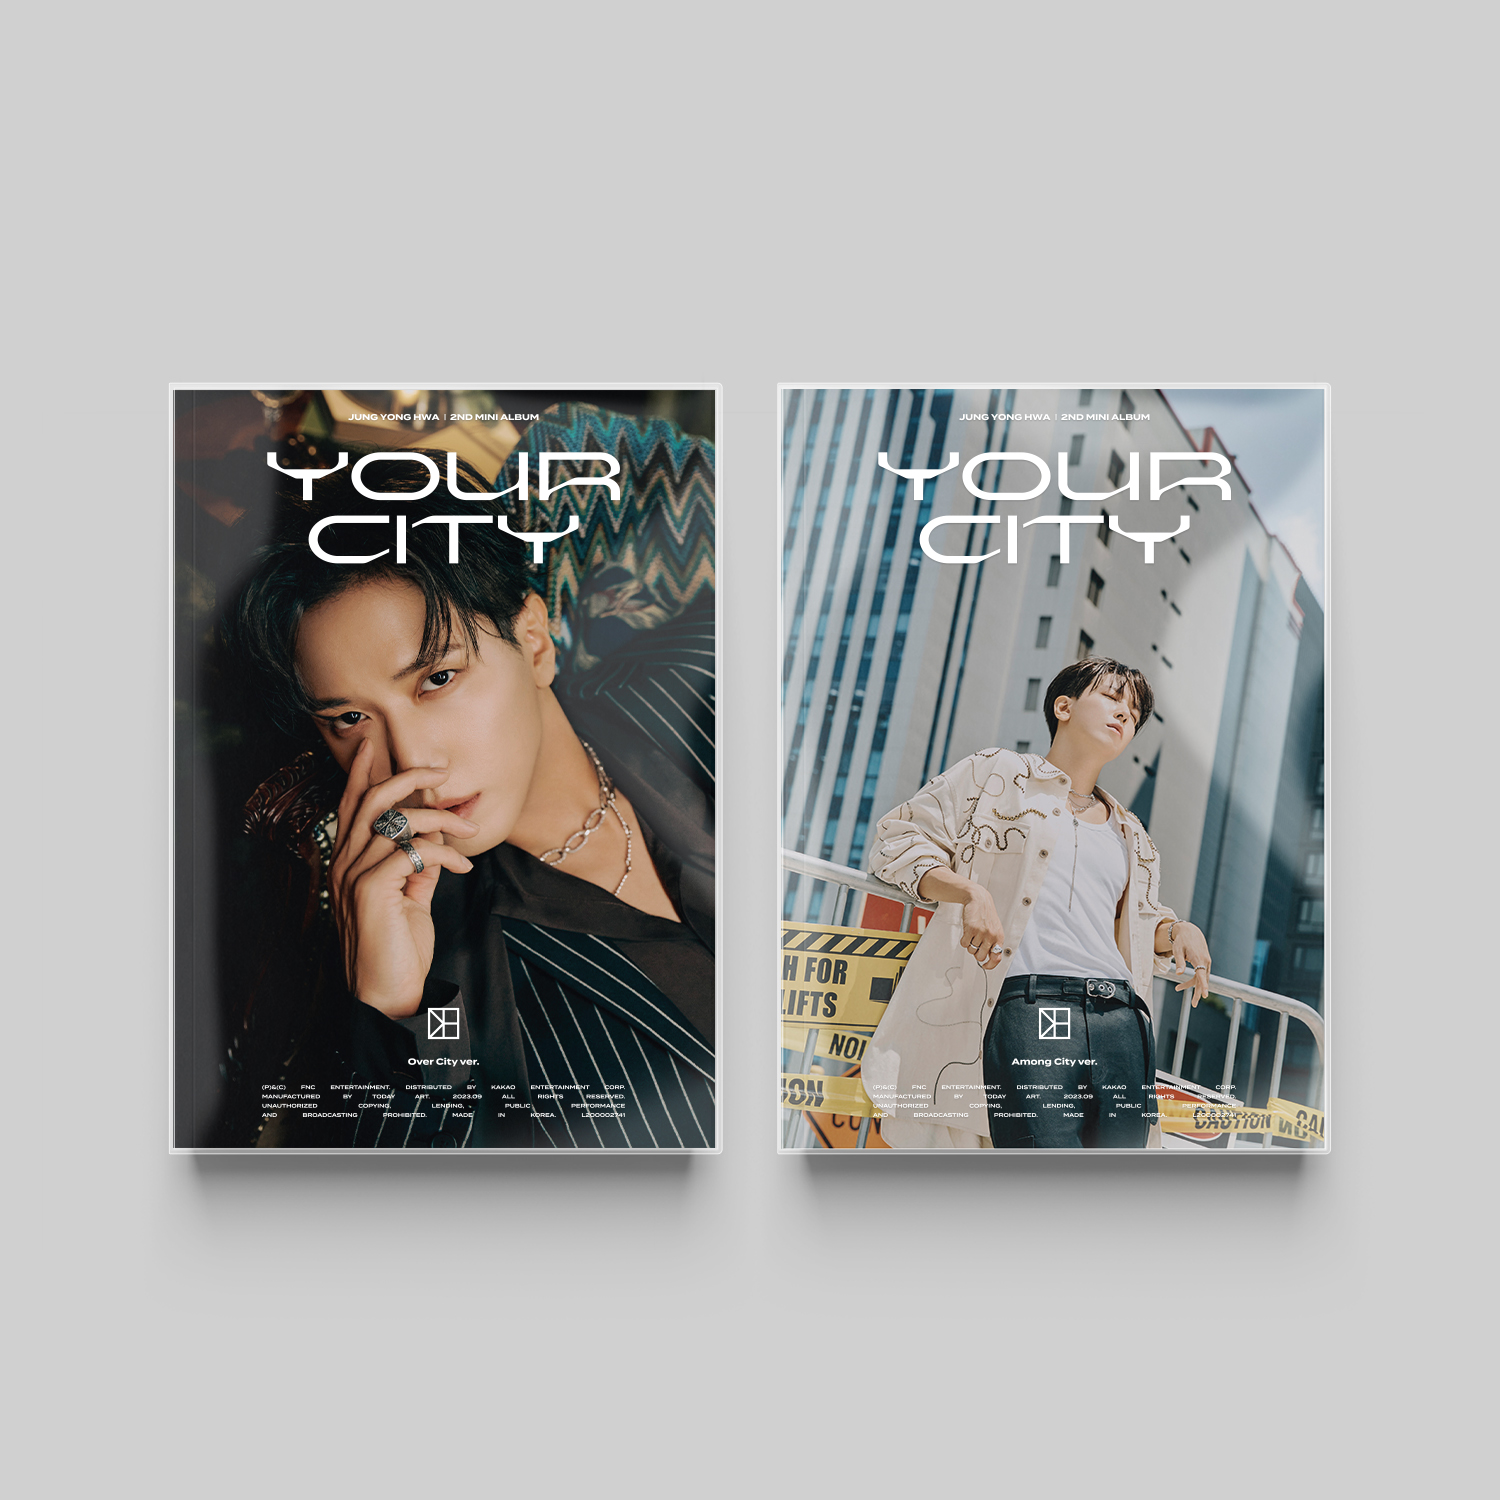 [Set] Jung Yonghwa Mini 2nd Album [YOUR CITY] (Over City ver. / Among City ver.)